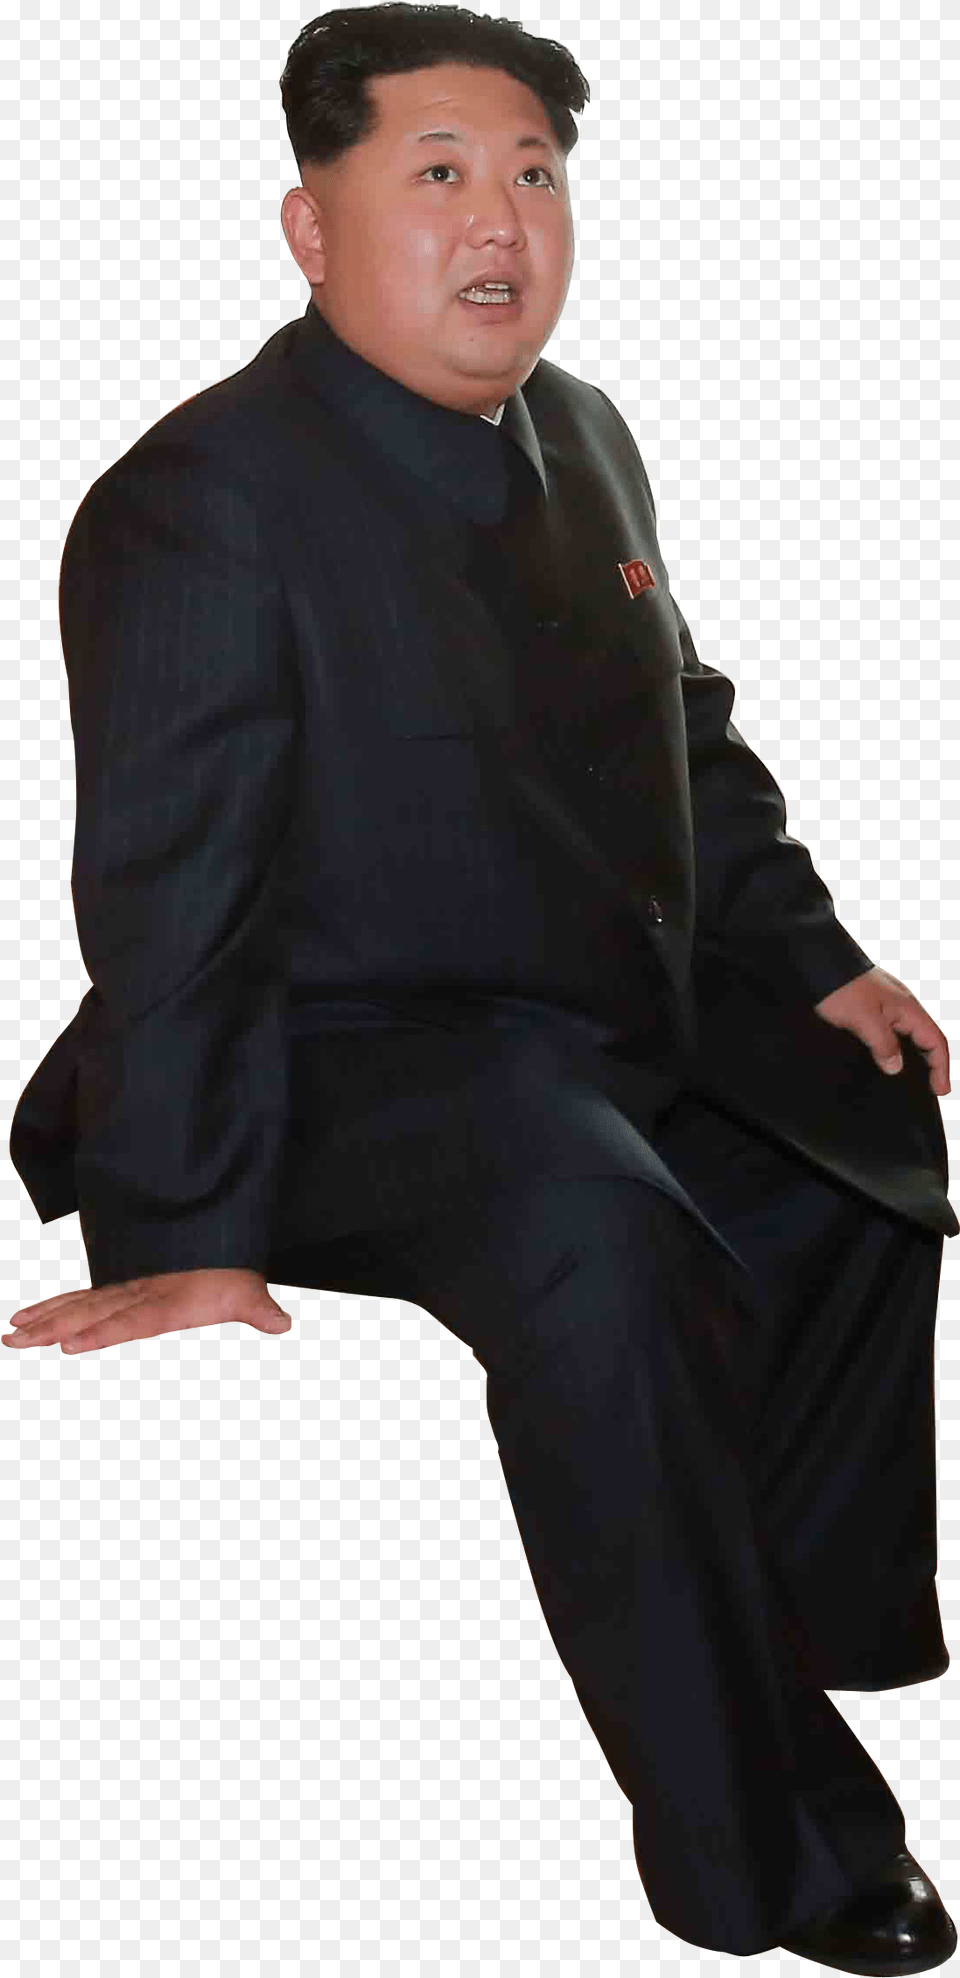 Kim Jong Un Sitting, Suit, Clothing, Formal Wear, Person Png